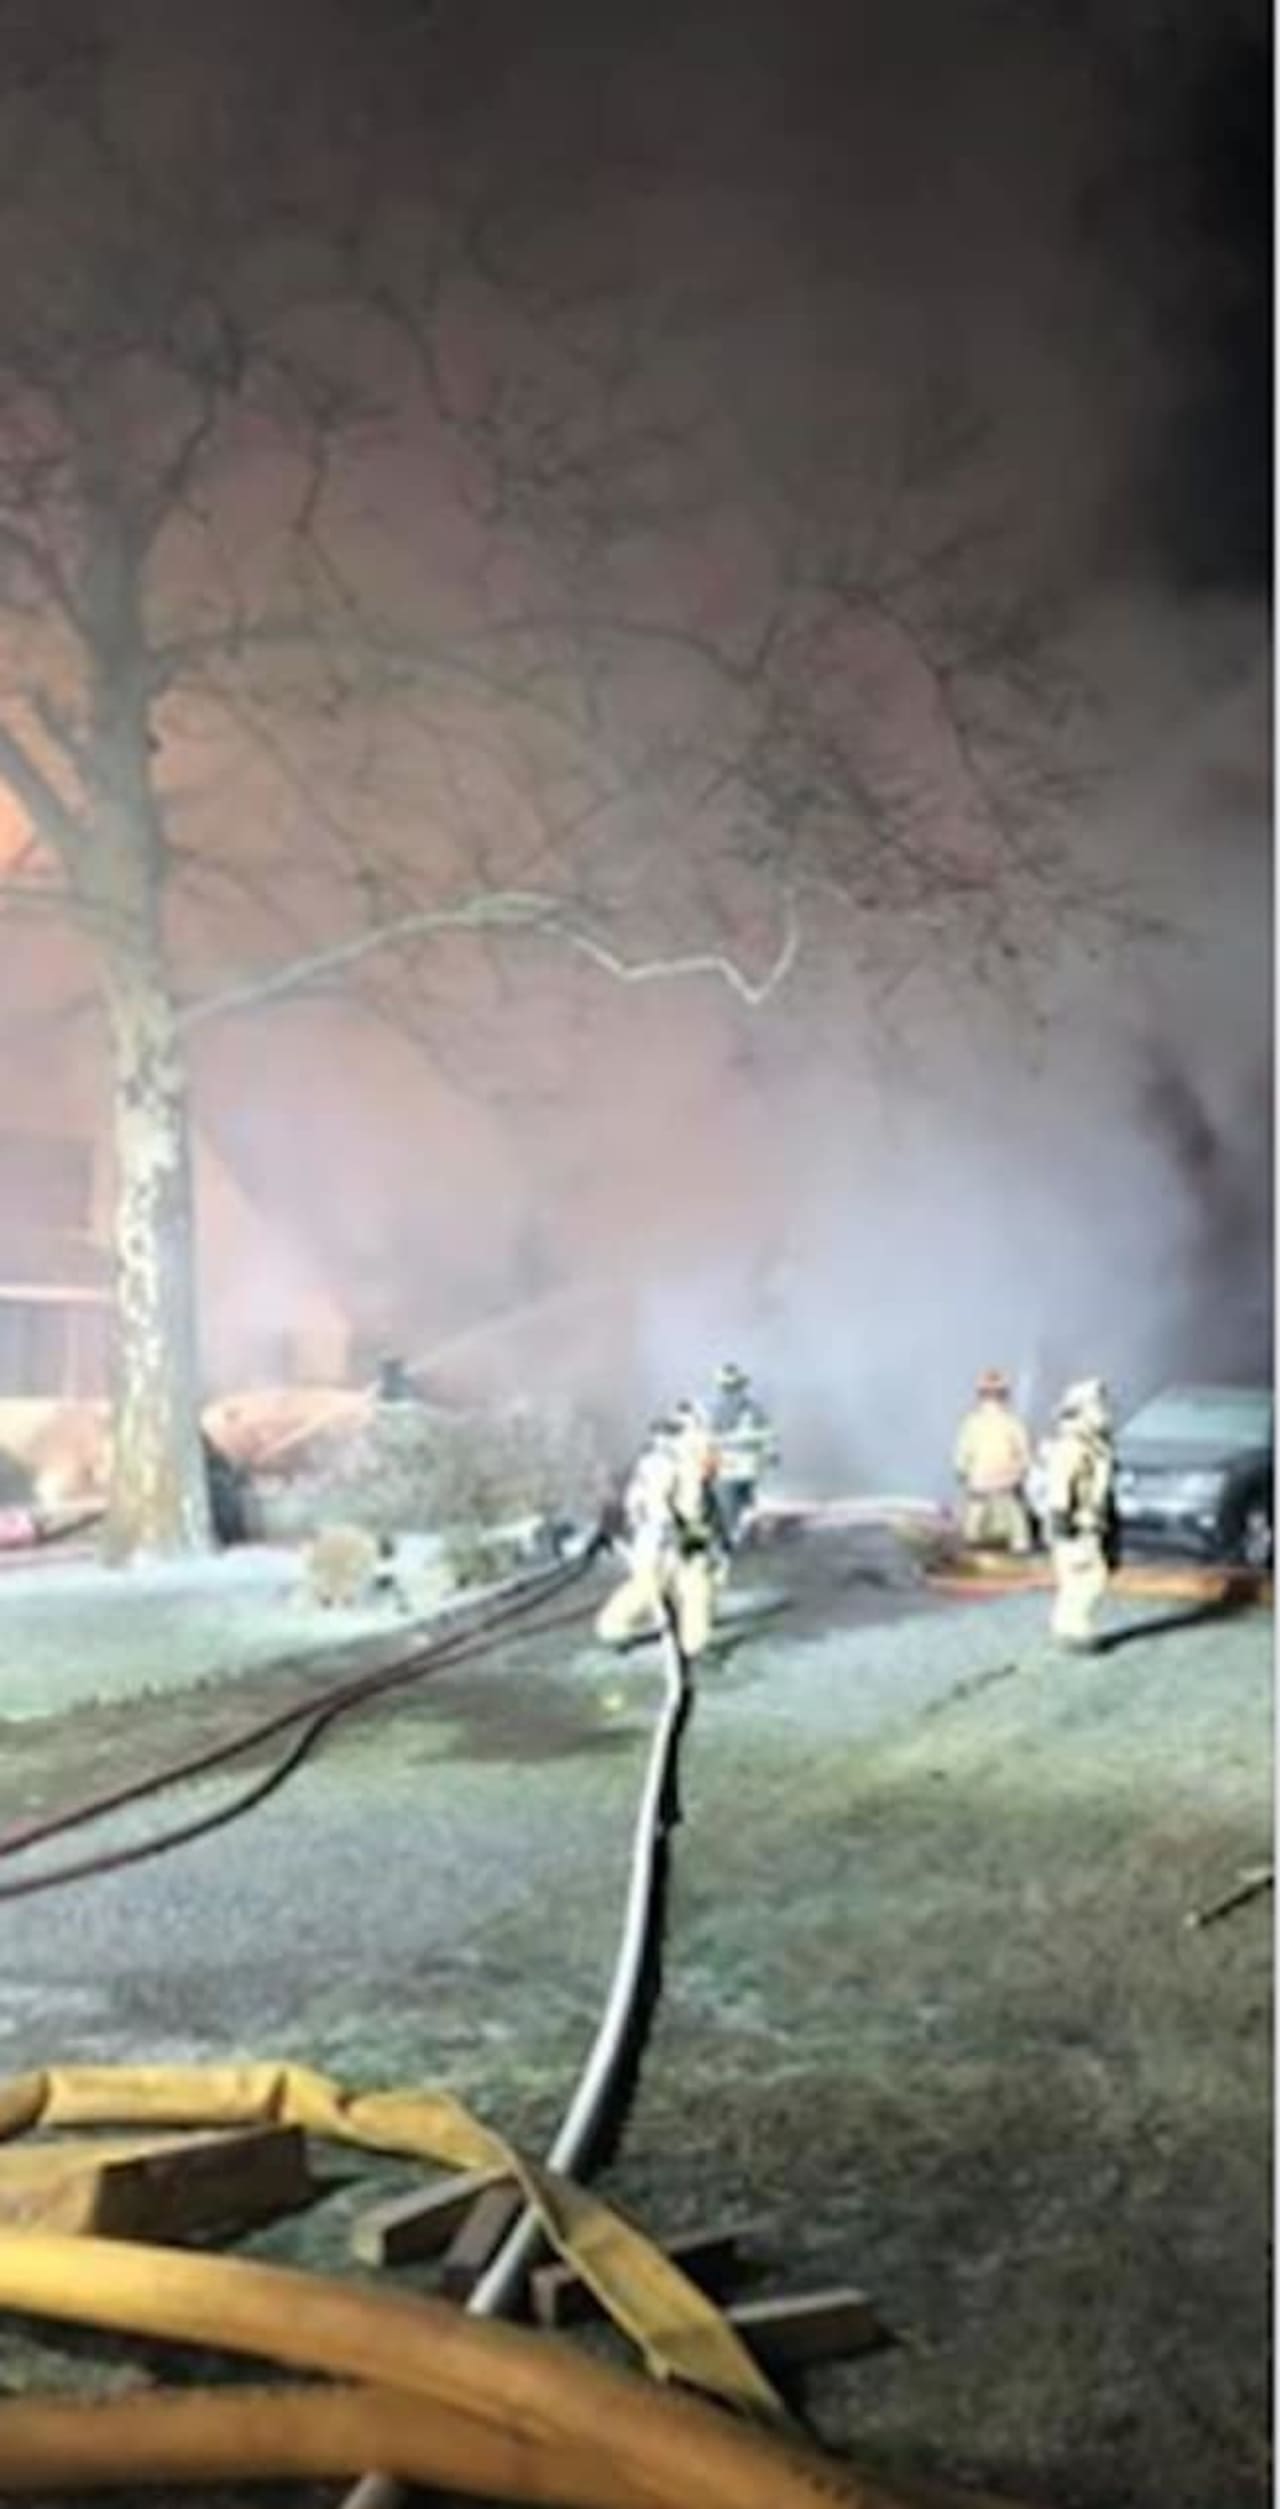 Firefighters from multiple municipalities battled the three-alarm blaze on Mamaroneck Road in Scarsdale.